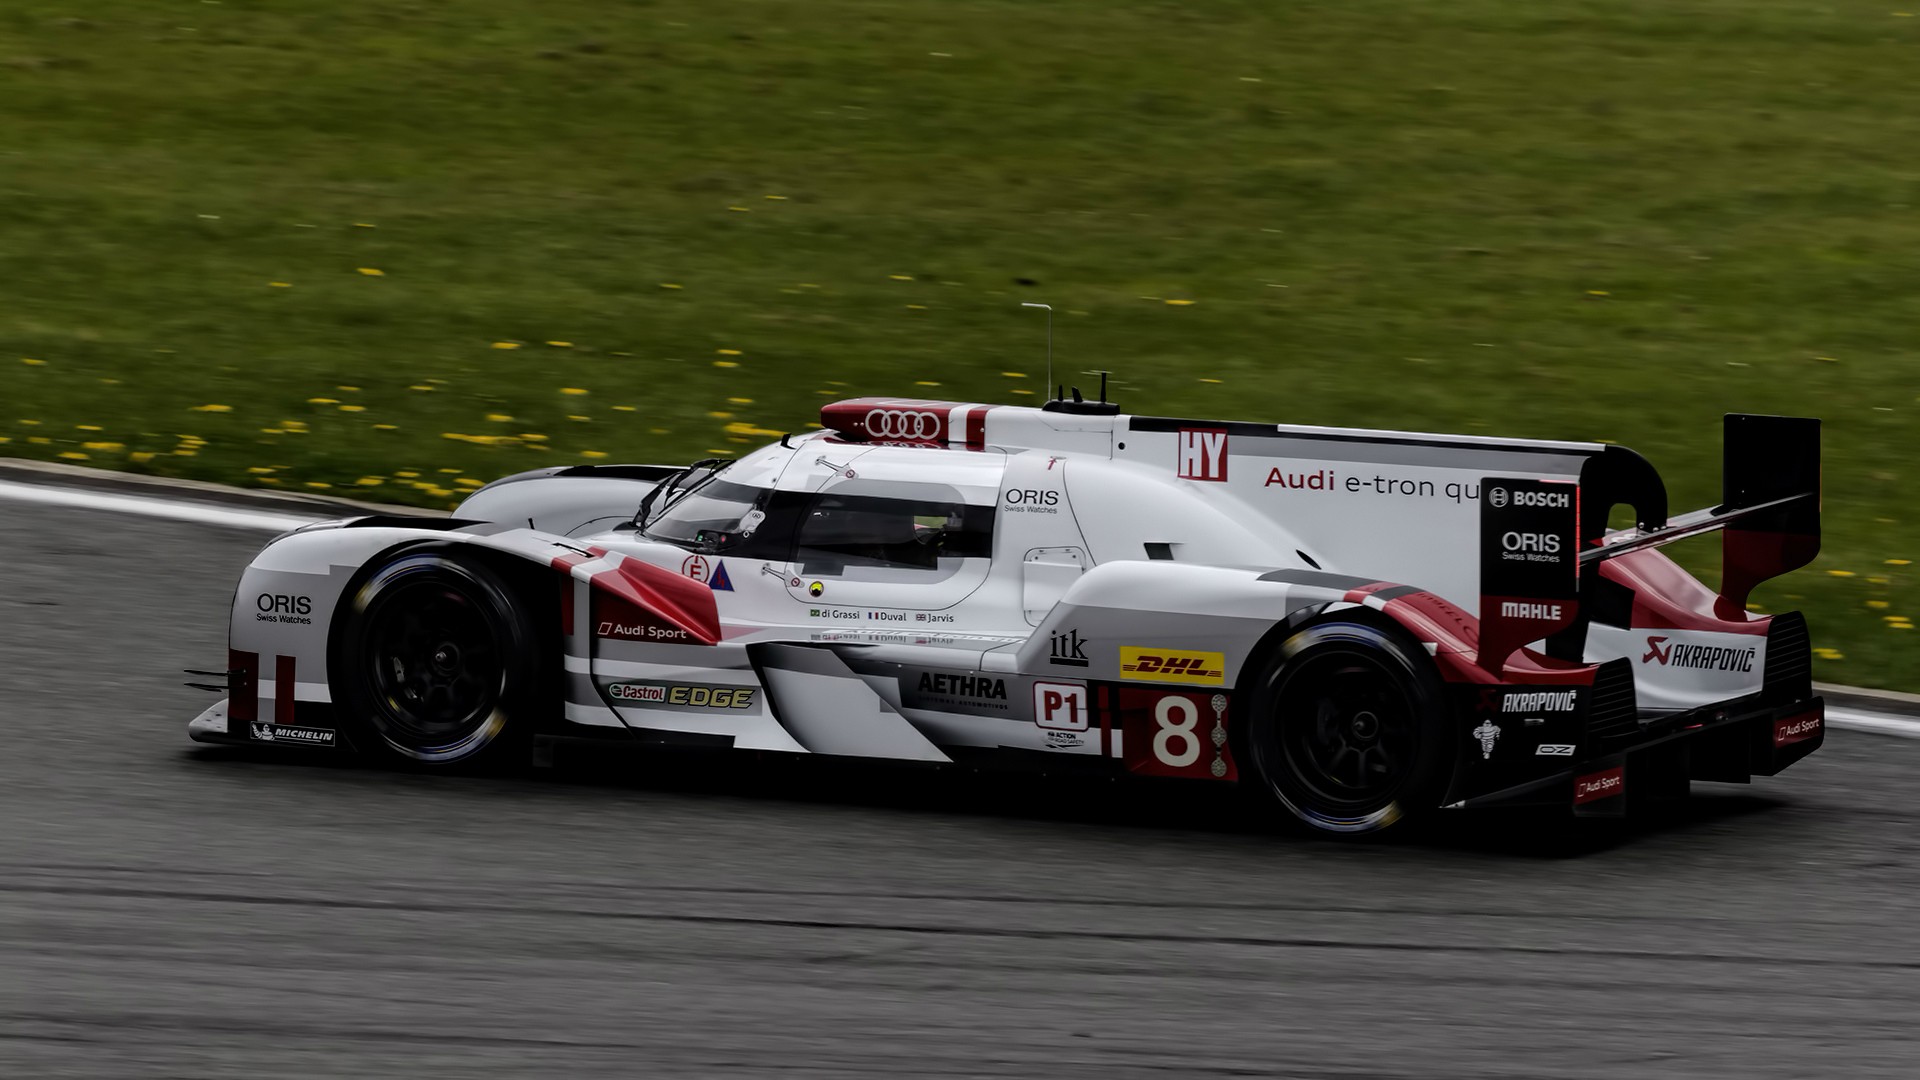 General 1920x1080 Audi R18 racing Audi race cars vehicle car white cars motorsport livery Volkswagen Group